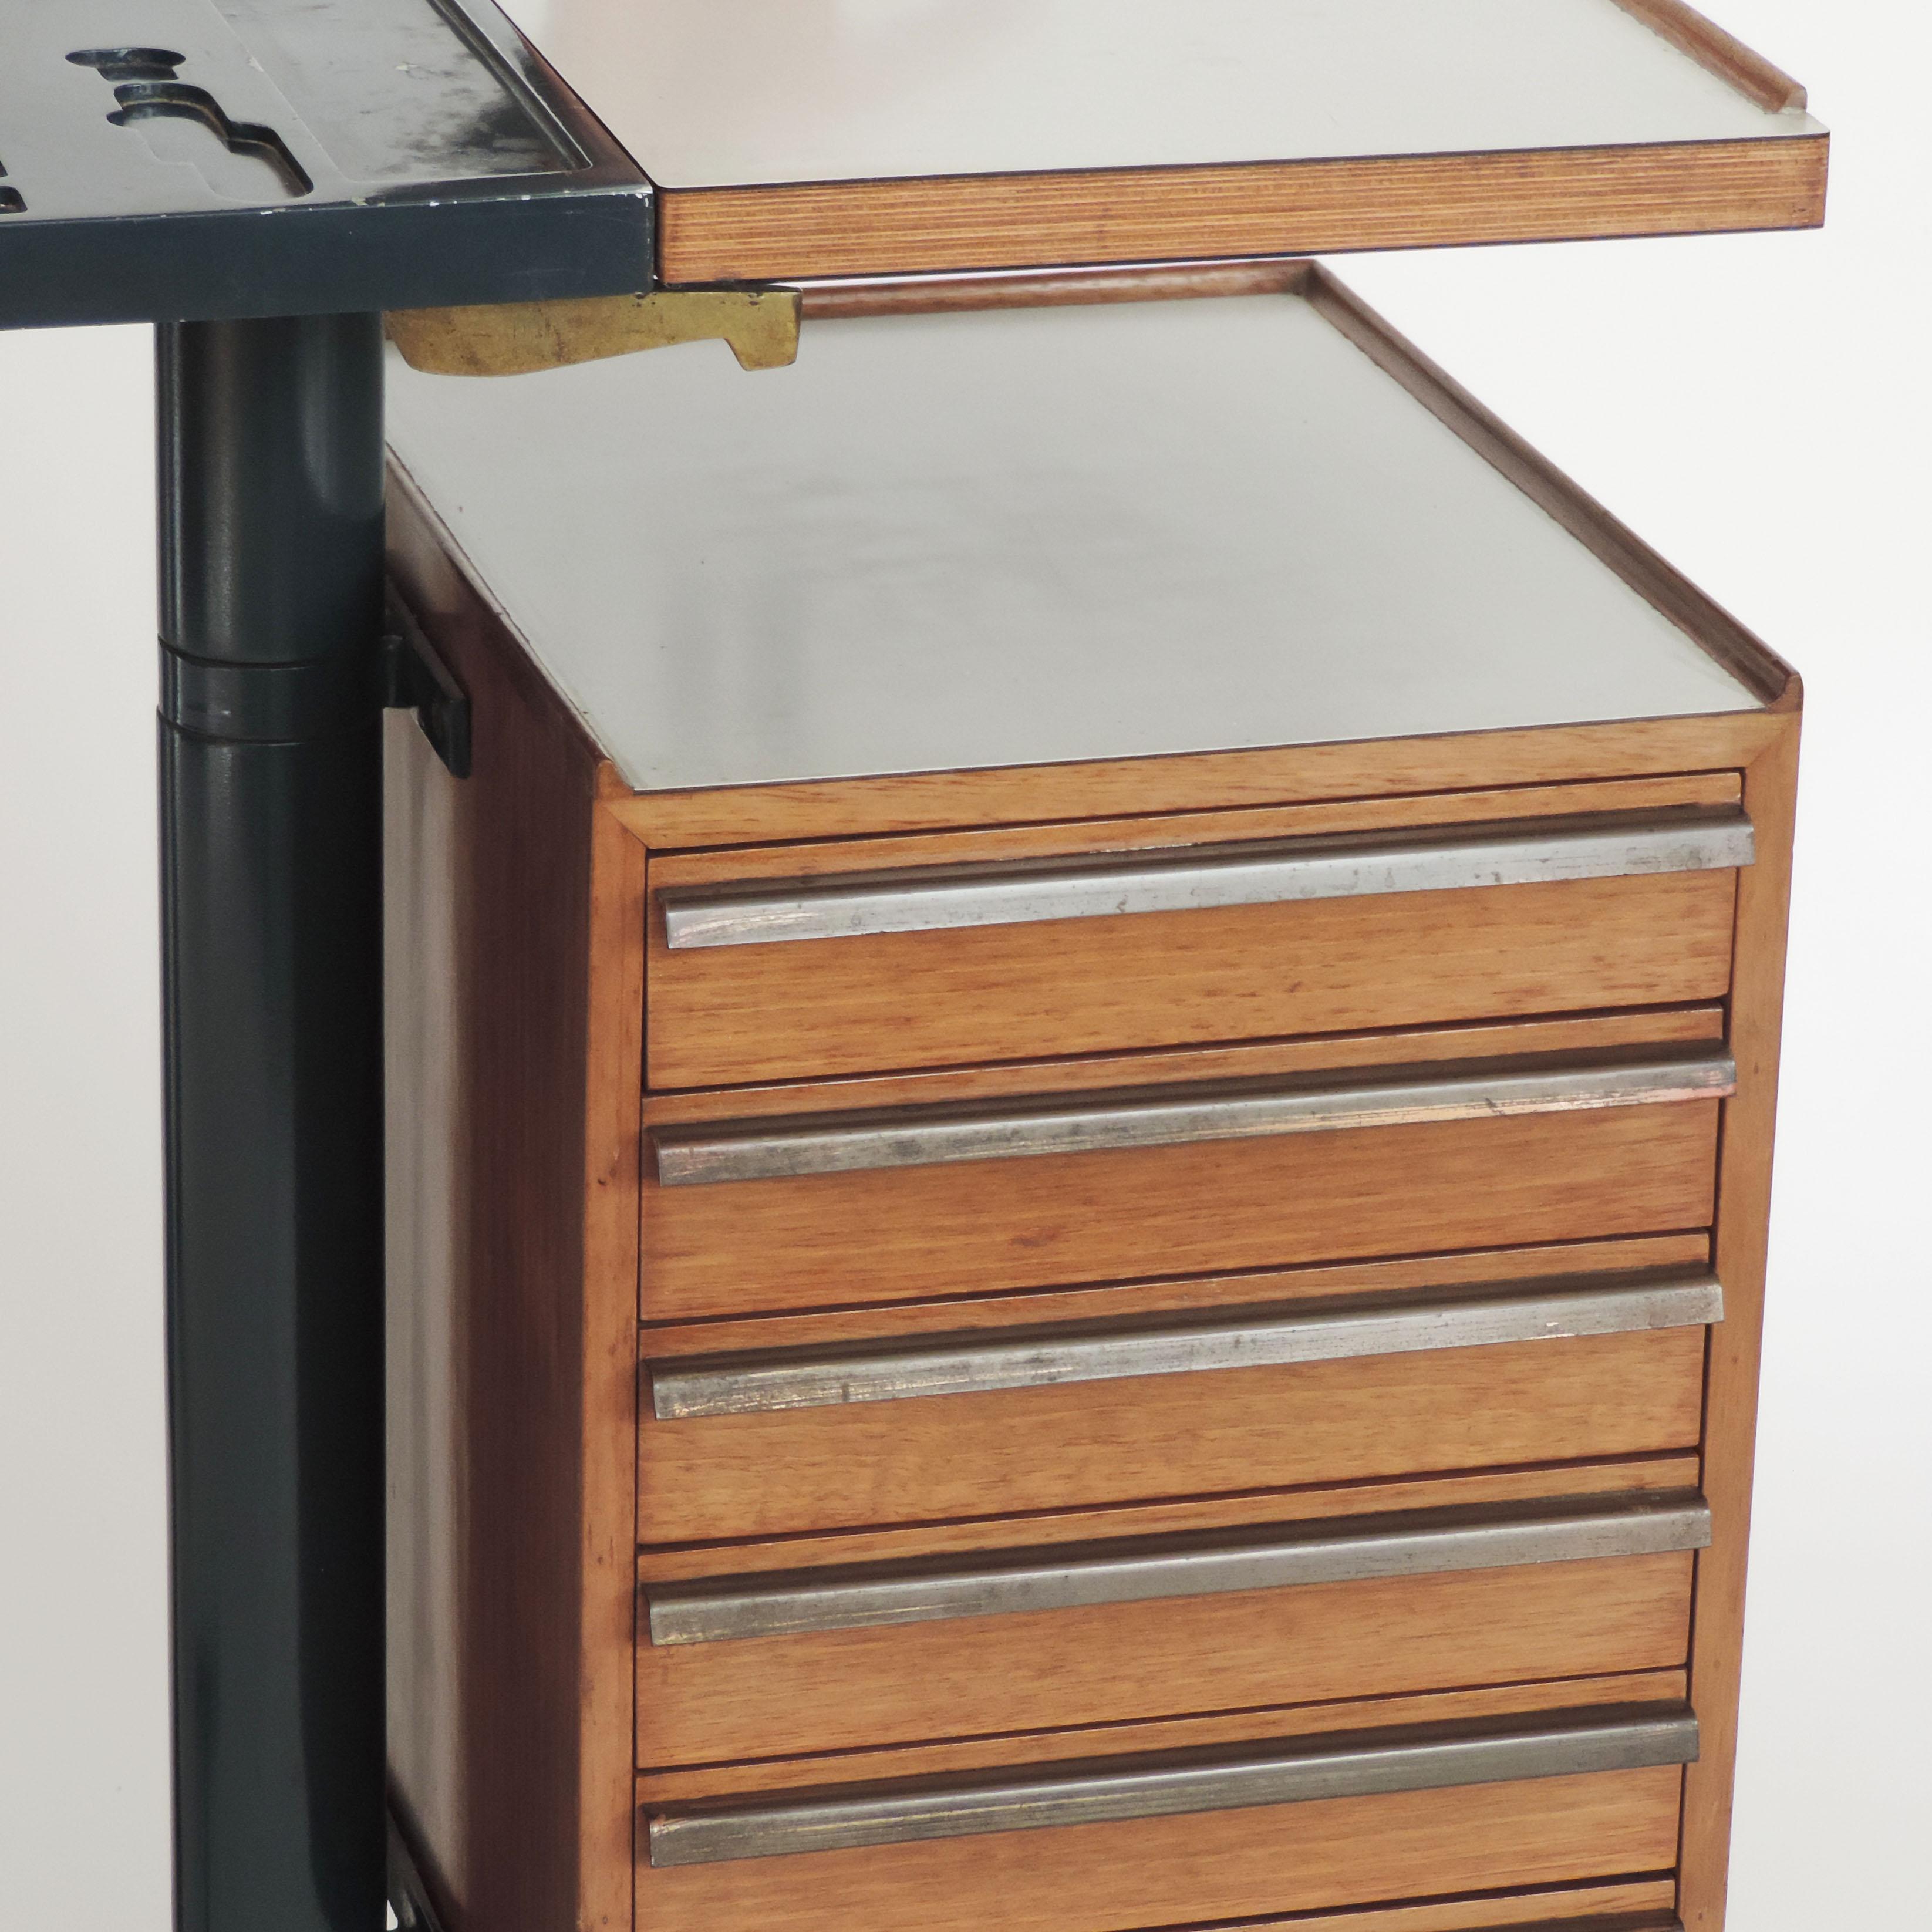 Wood Studio BBPR Small Adjustable Desk for the Olivetti Store in New York, Italy 1954 For Sale